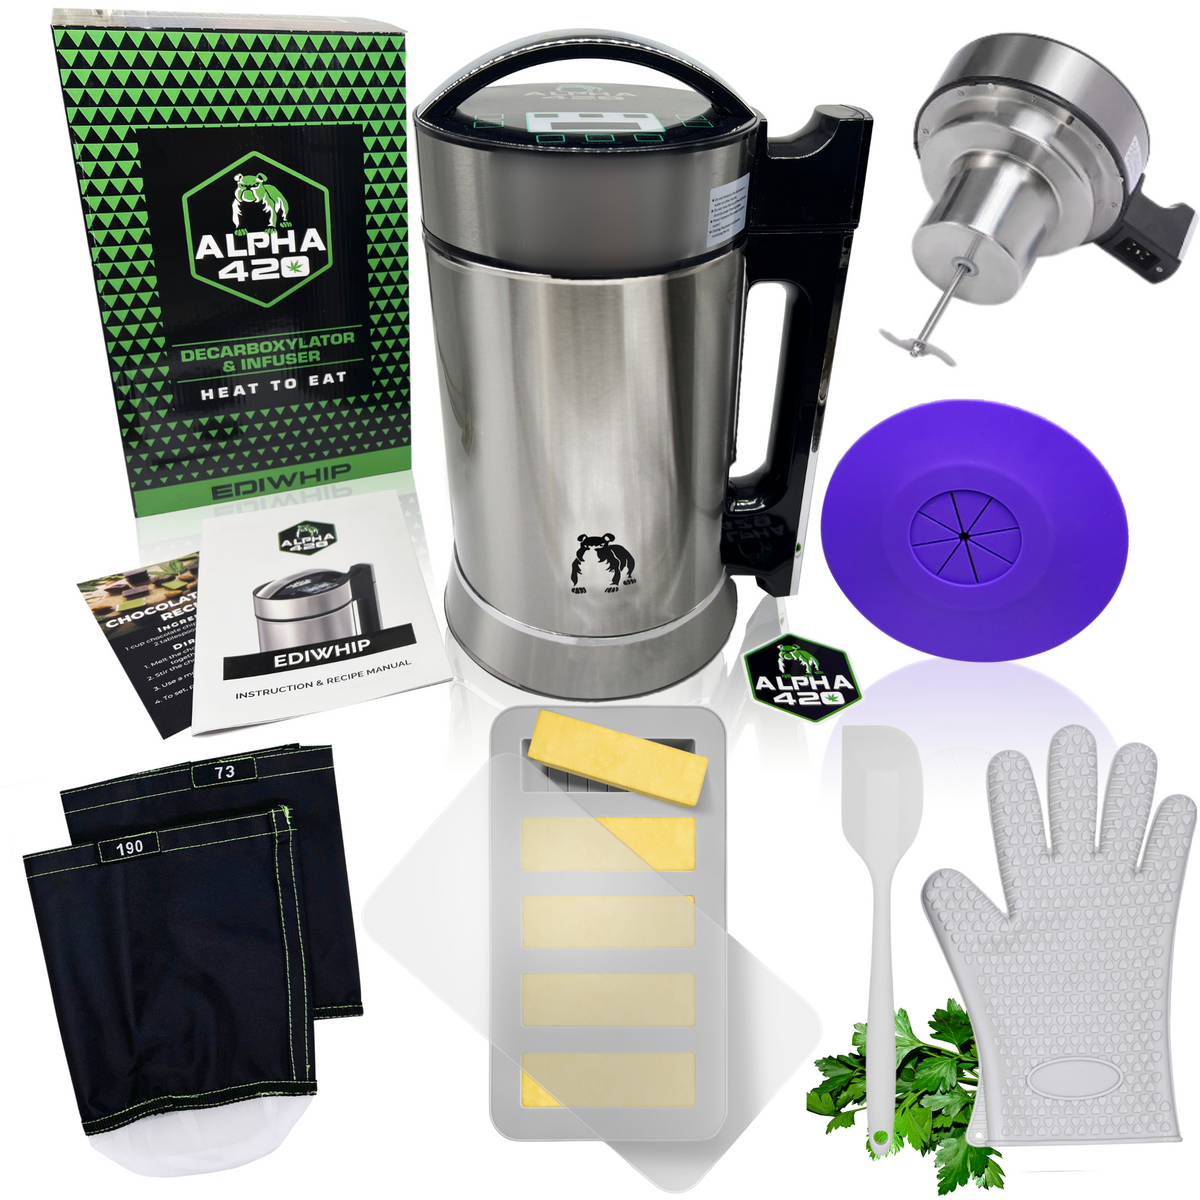 All in 1, Complete Butter Maker Kit for Decarboxylators &  Infusers - Make Magic Butter, Silicone Butter Mold for Homemade Butter  Strainer Filter Bags, Glove, Accessories for Magical Infusions EdiPack